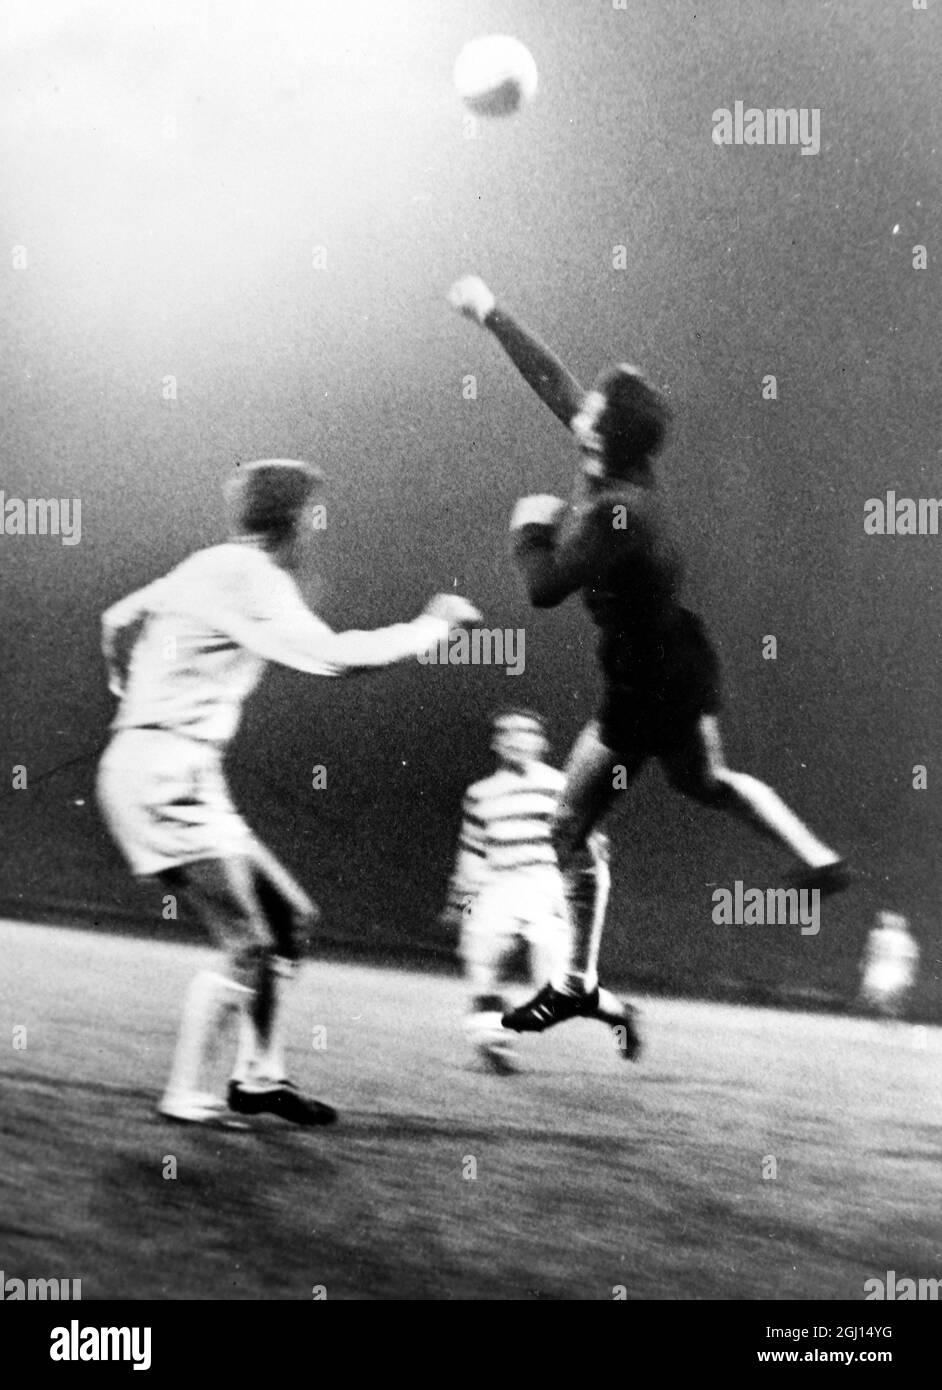 FOOTBALL CHARITY MATCH REAL MADRID V CELTIC GLASGOW ARIQUISTAIN & CHALM ; 11. SEPTEMBER 1962 Stockfoto